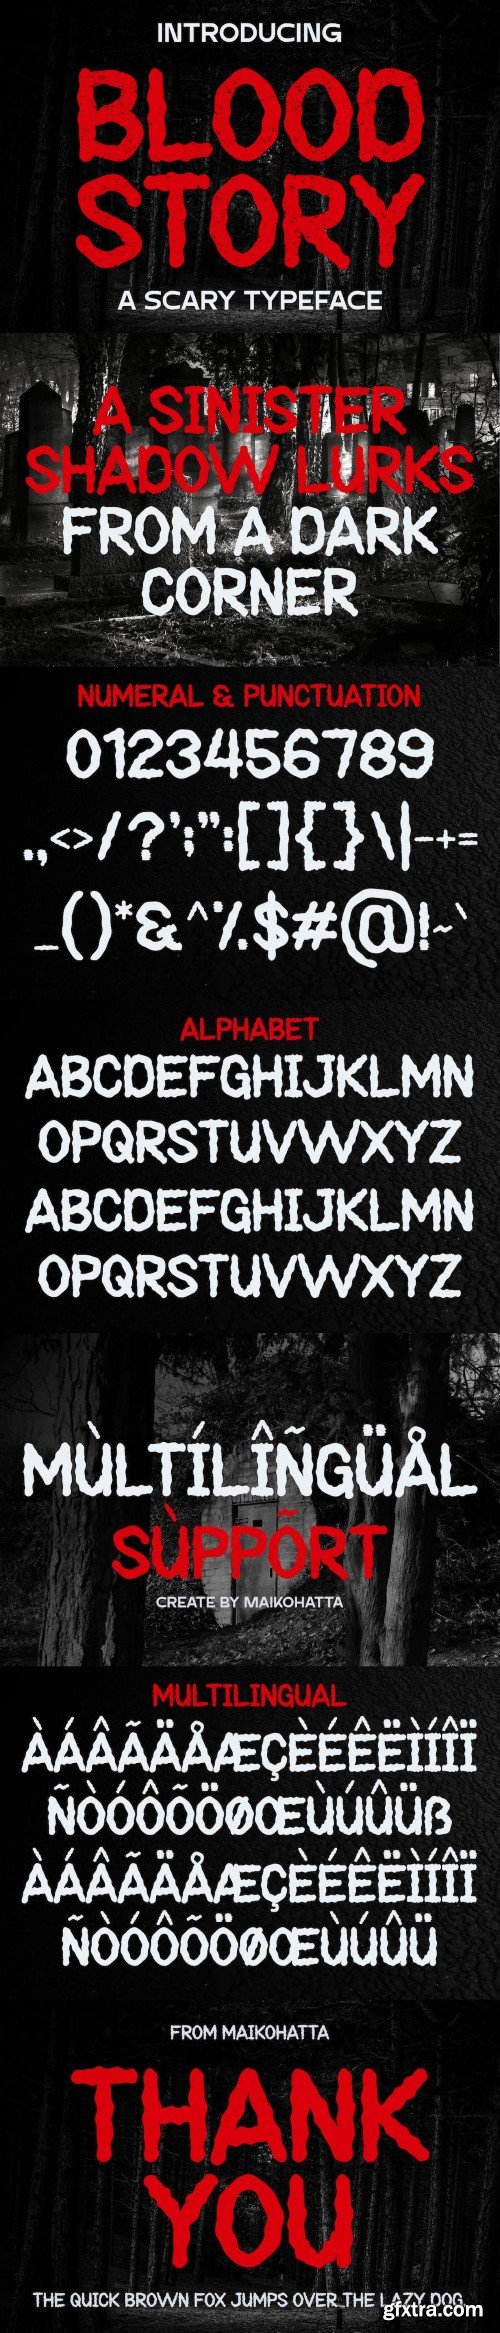 Blood Story - Scary Typeface